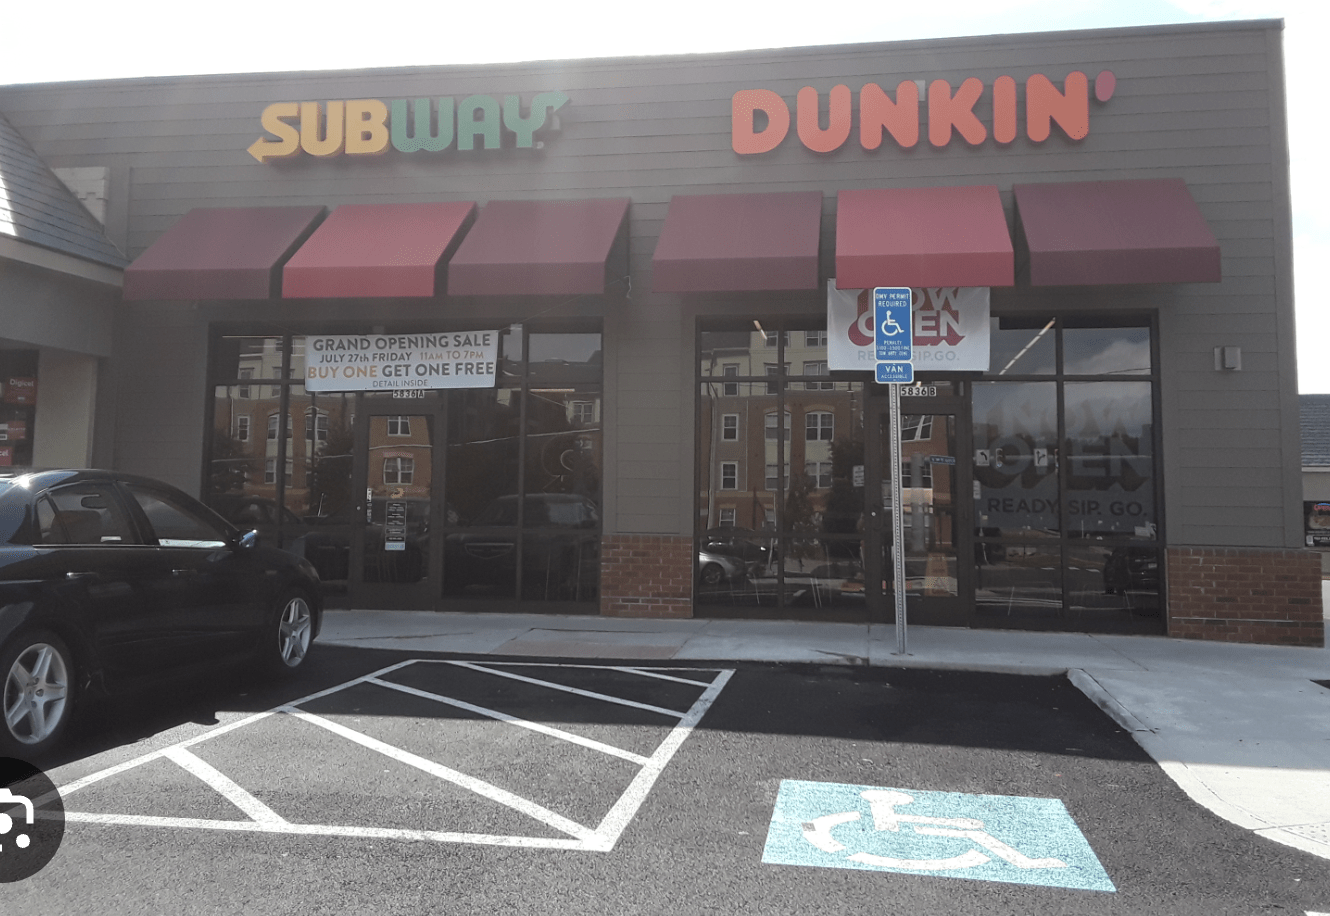 SUBWAY AND DUNKIN DONUTS STORES SIDE BY SIDE